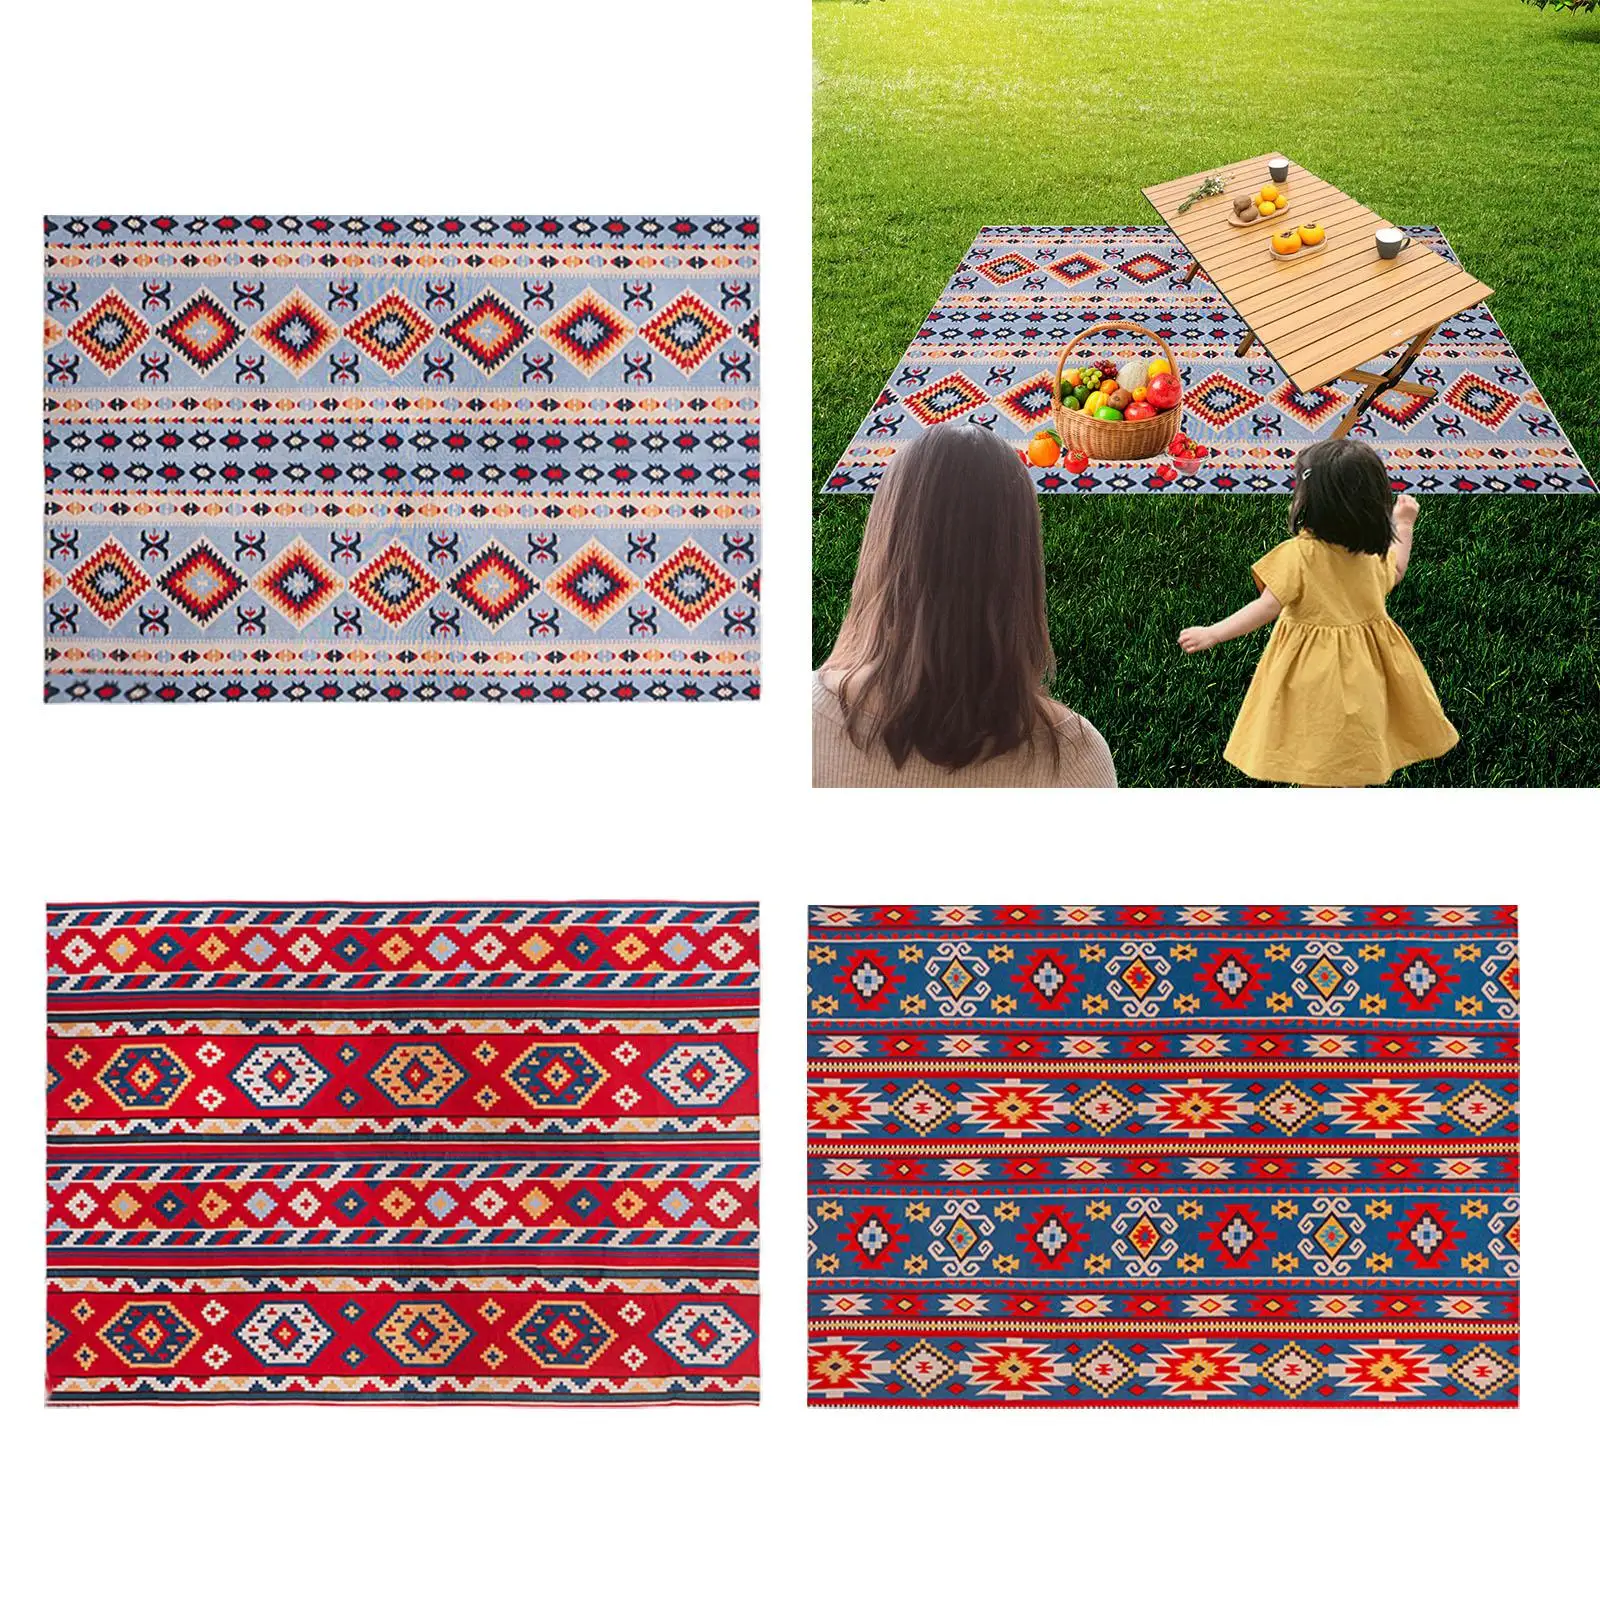 Large Picnic Outdoor Blanket Outdoor Moistureproof Blanket Mat Picnic Blanket for Lawn Beach Travel Sporting Events